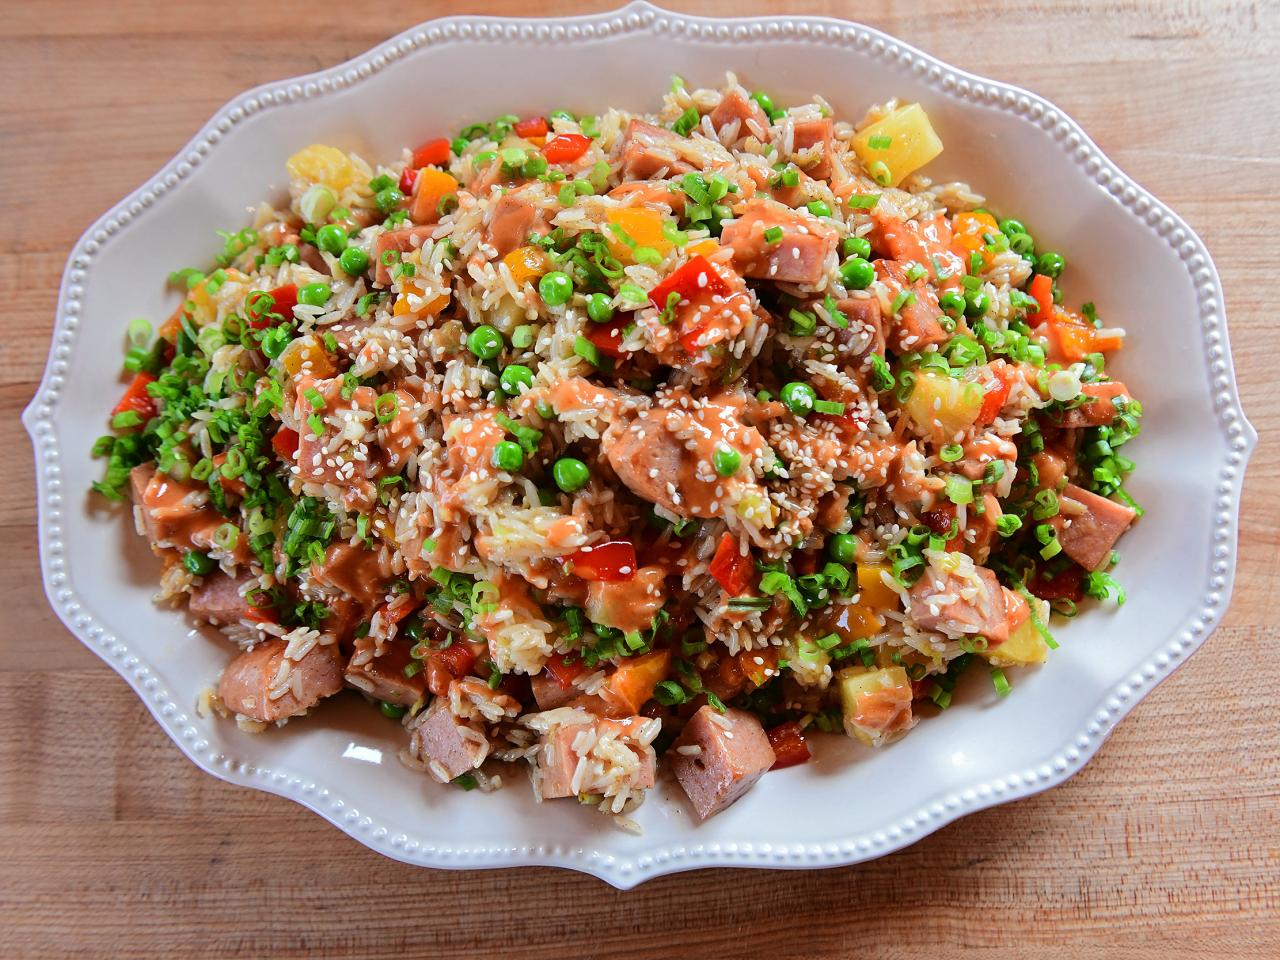 Remie Spices - fried rice recipe that is super tasty and